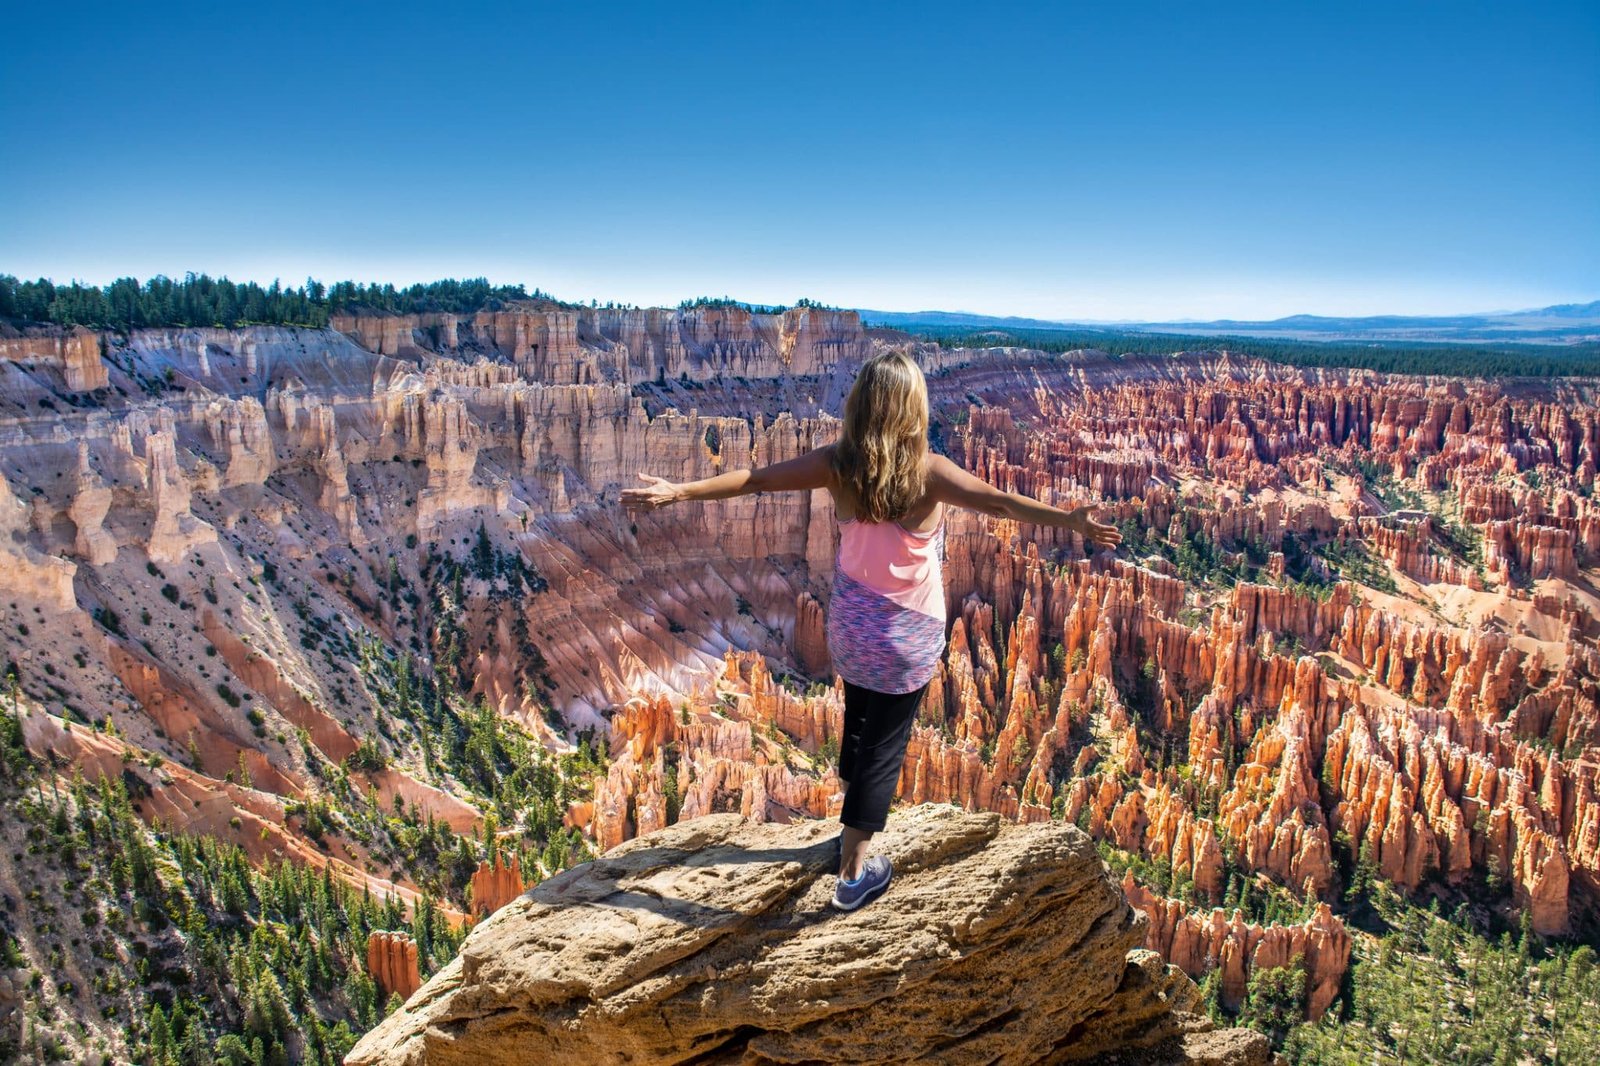 Hiker girl on the mountain top, сoncept of freedom, victory, active lifestyle. Woman relaxing on top of the mountain looking at beautiful mountain view. Woman with outstretched arms enjoying beautiful scenery on hiking trip. Inspiration Point, Bryce Canyon National Park, Utah, USA